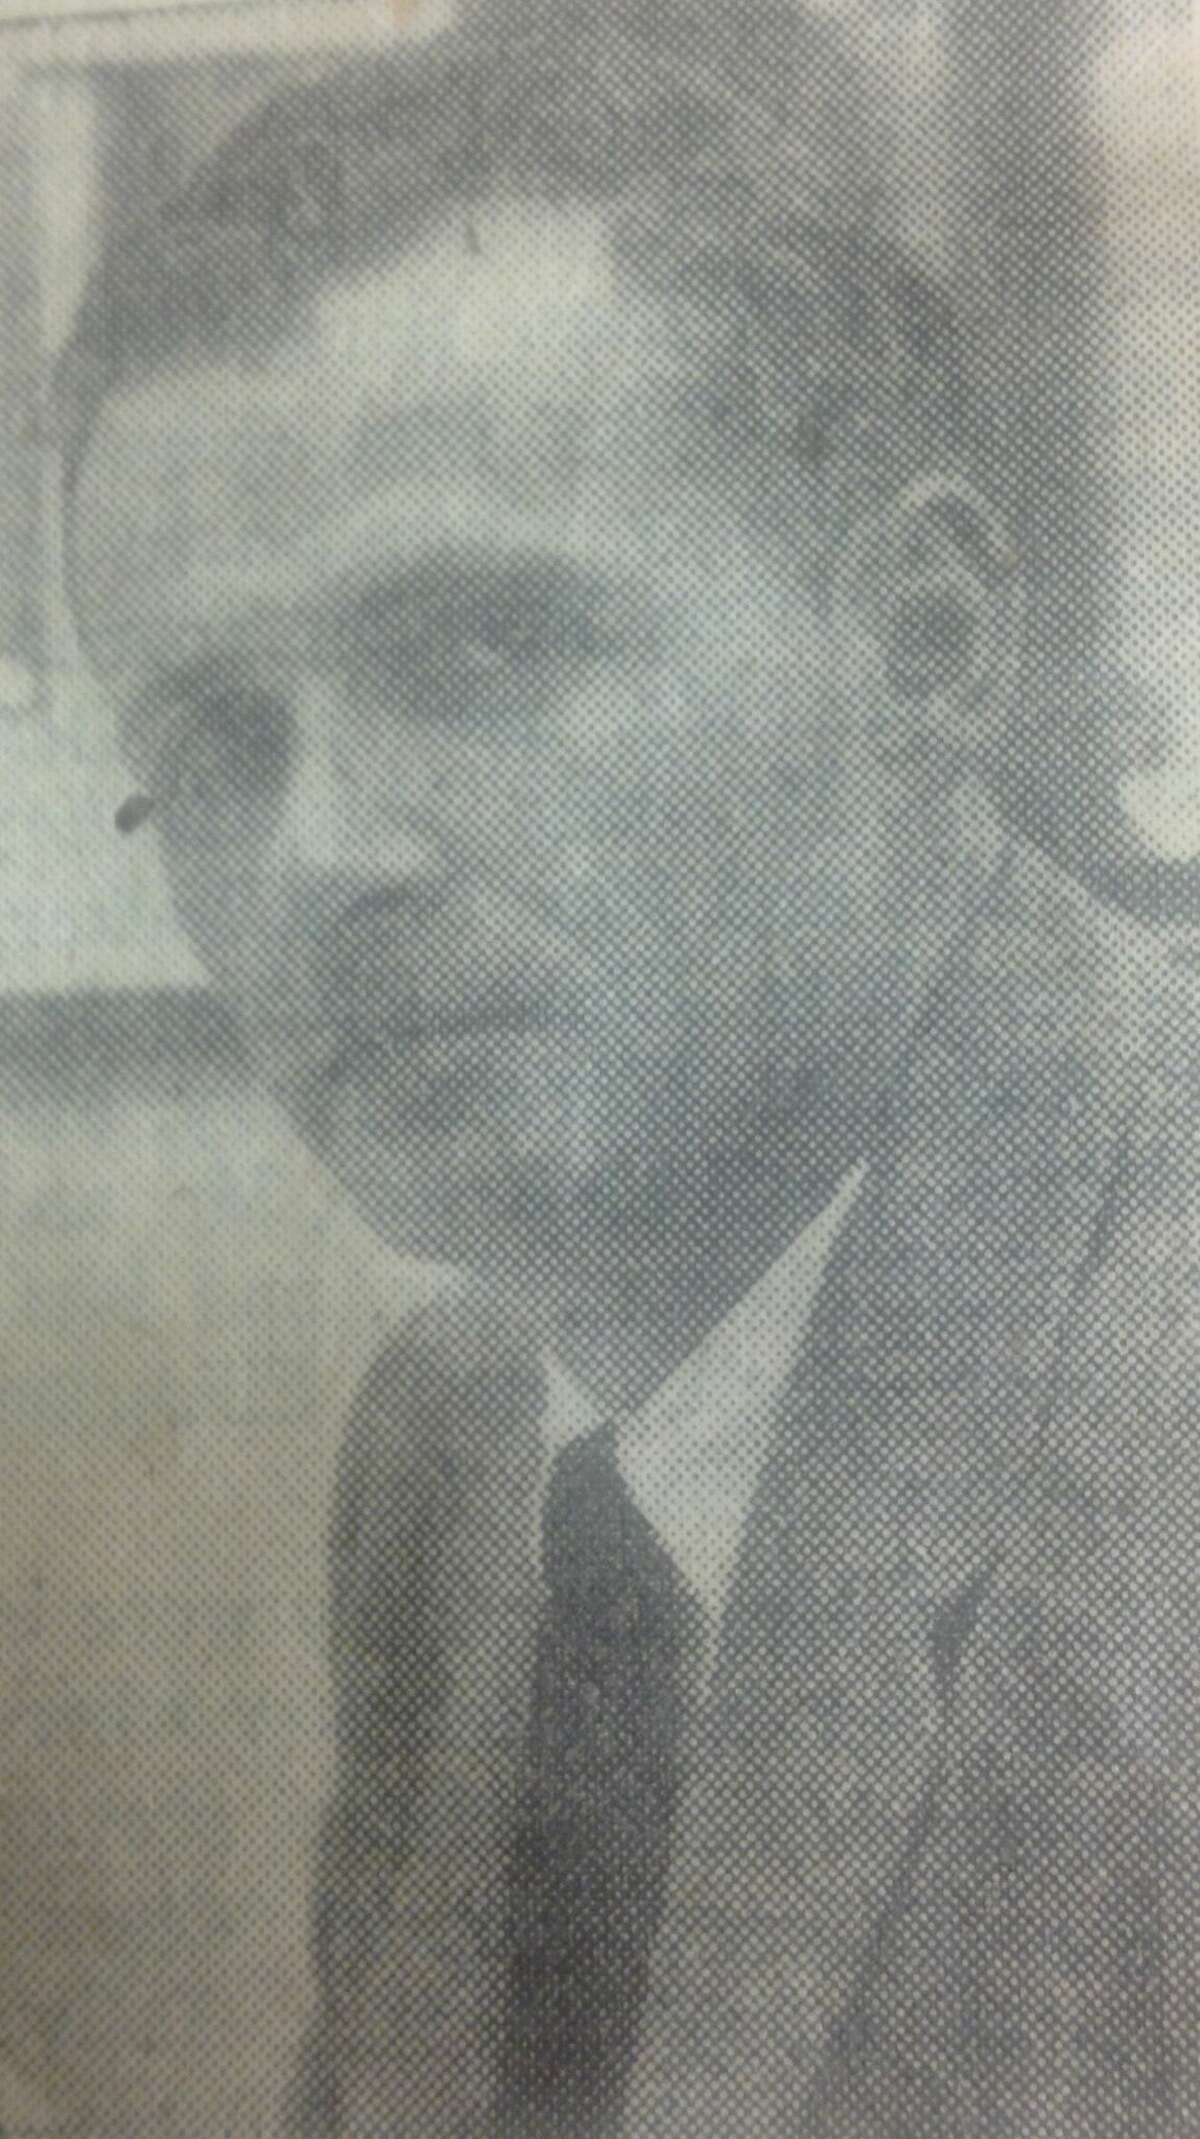 An article from March 27, 1958, "Midland Stadium Drive Slated to Open April 9," states "Robert B. Bennett (pictured) was named to manage a campaign to raise funds for the construction of a 4,200 seat stadium at Midland Central High School. Bennett was named to the post by the steering committee of the Midland Stadium Committee, headed by Robert Peele. The campaign will seek to raise $82,000 over a four-week period beginning April 9. Two assistant campaign chairmen have also been named. They are William R. Dixon and Robert T. Ferries."